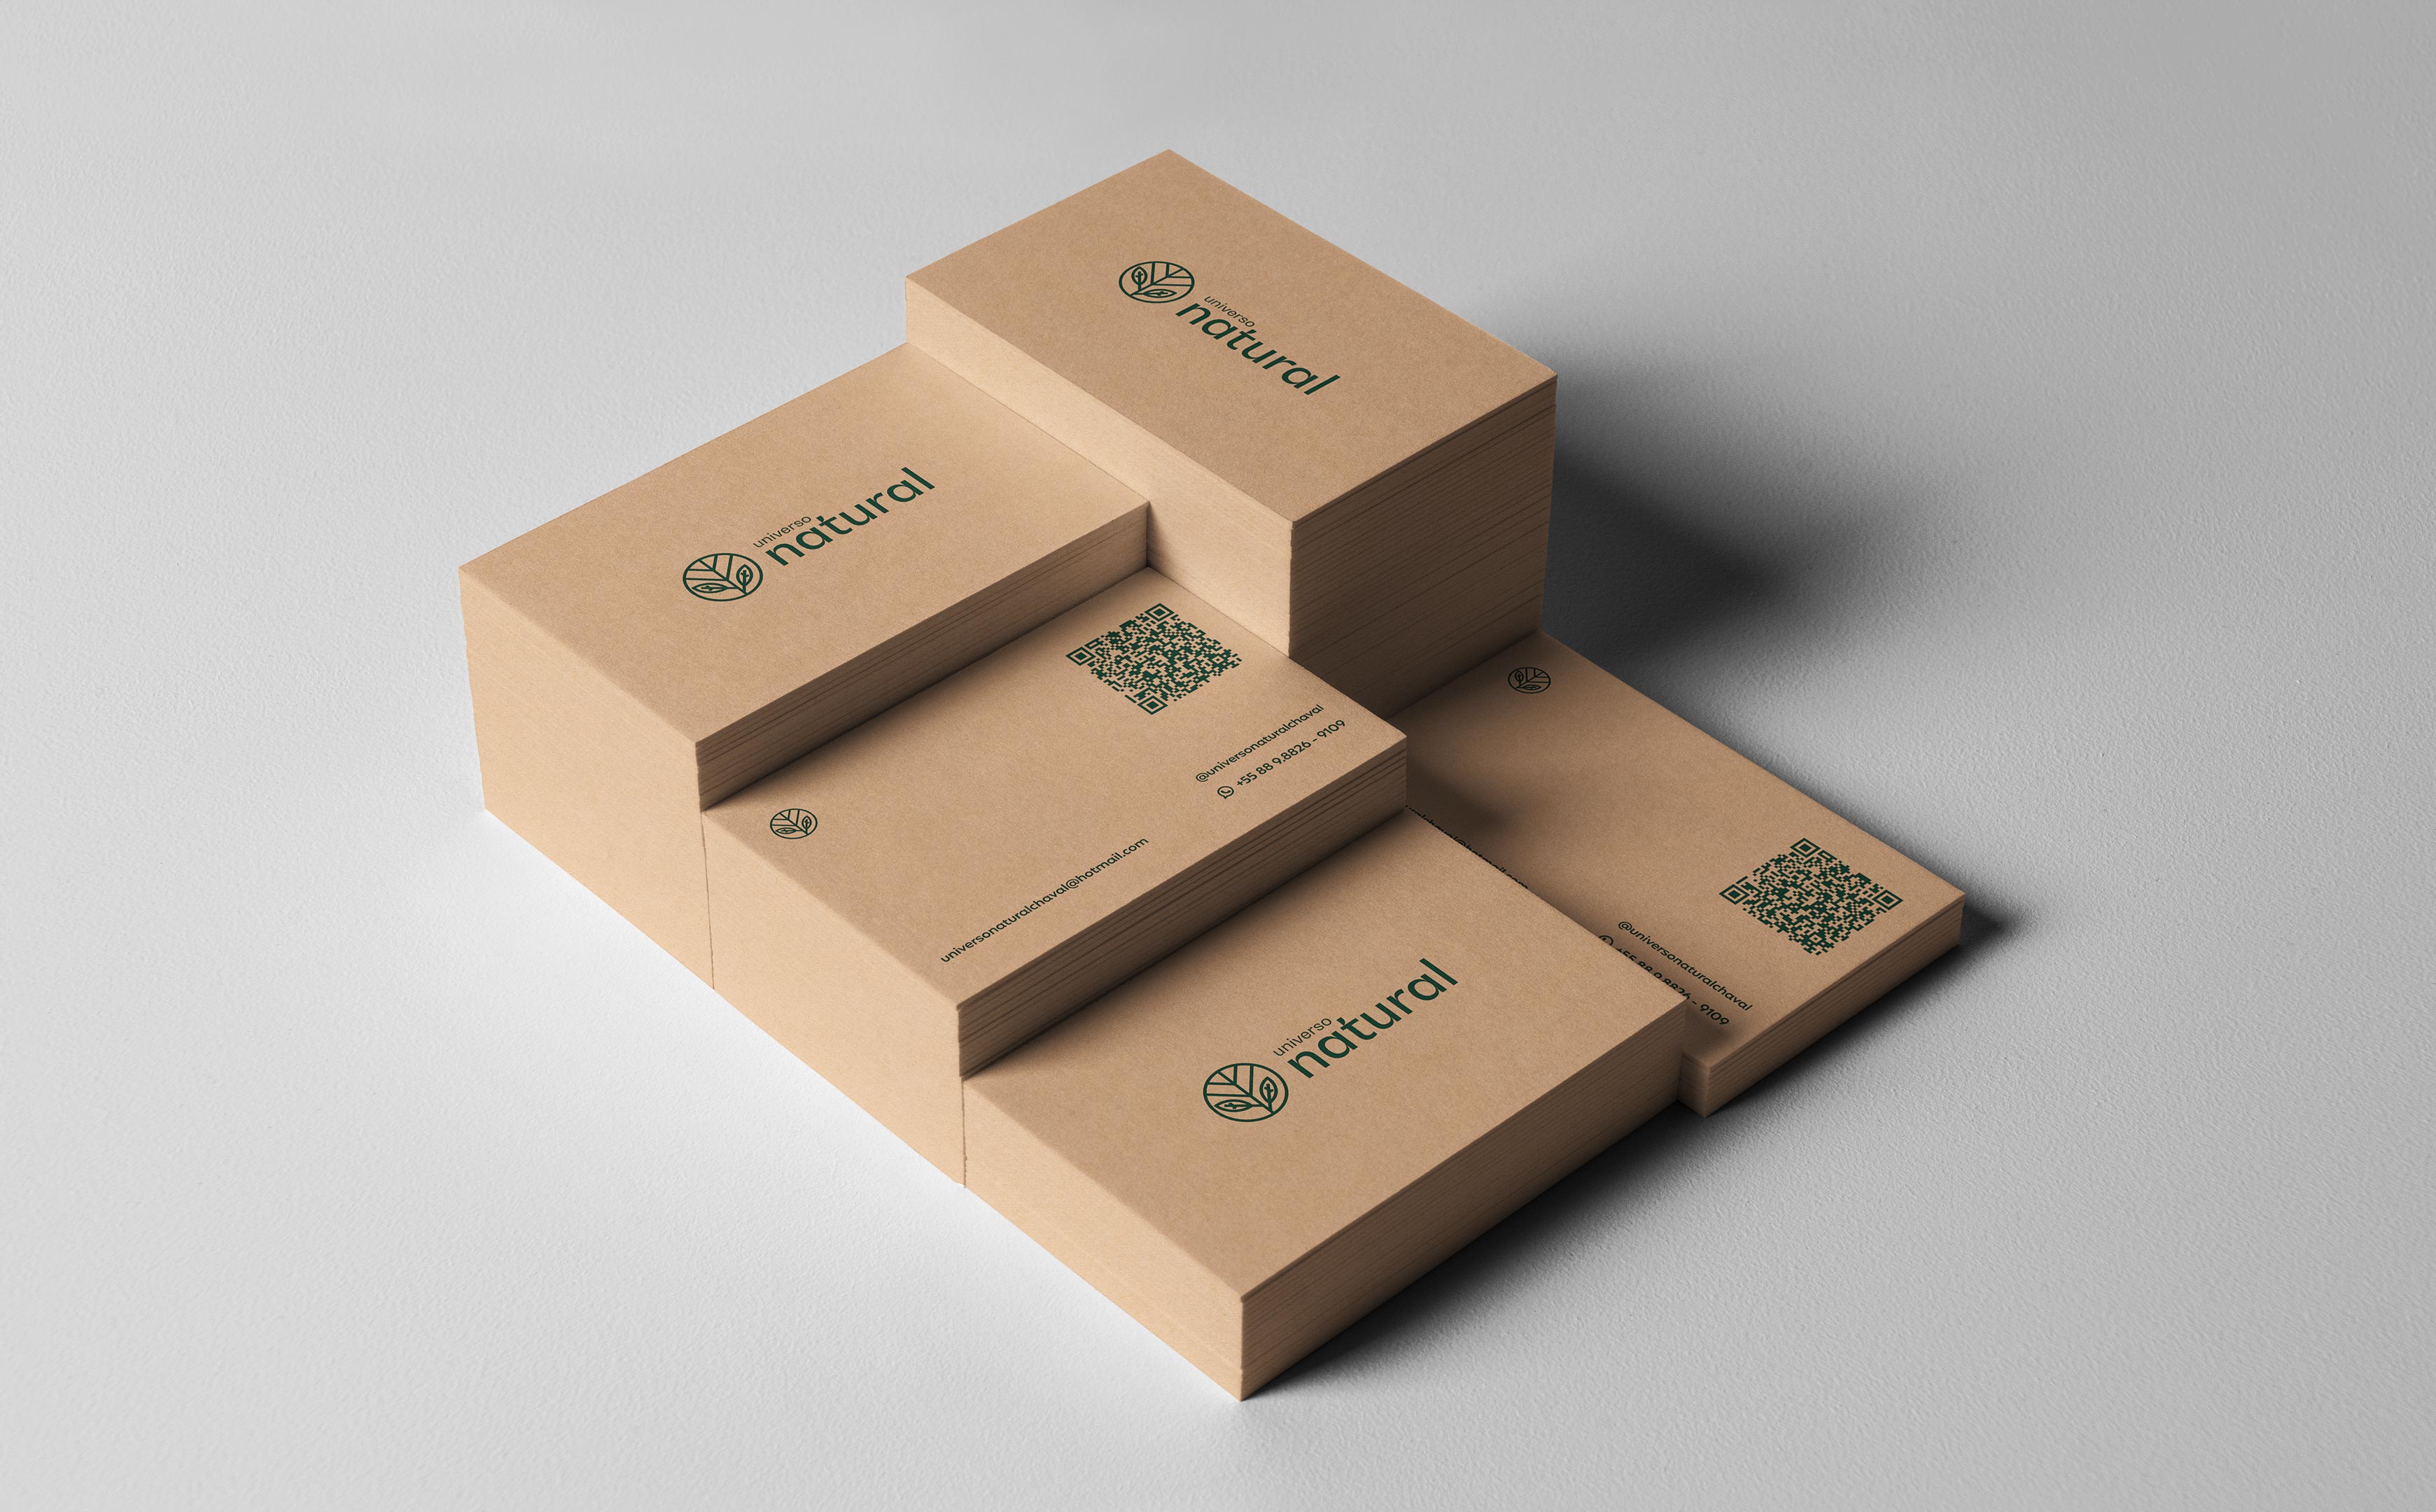 Silas Creative Studio Create Visual Identity and Packaging Design for Universo Natural